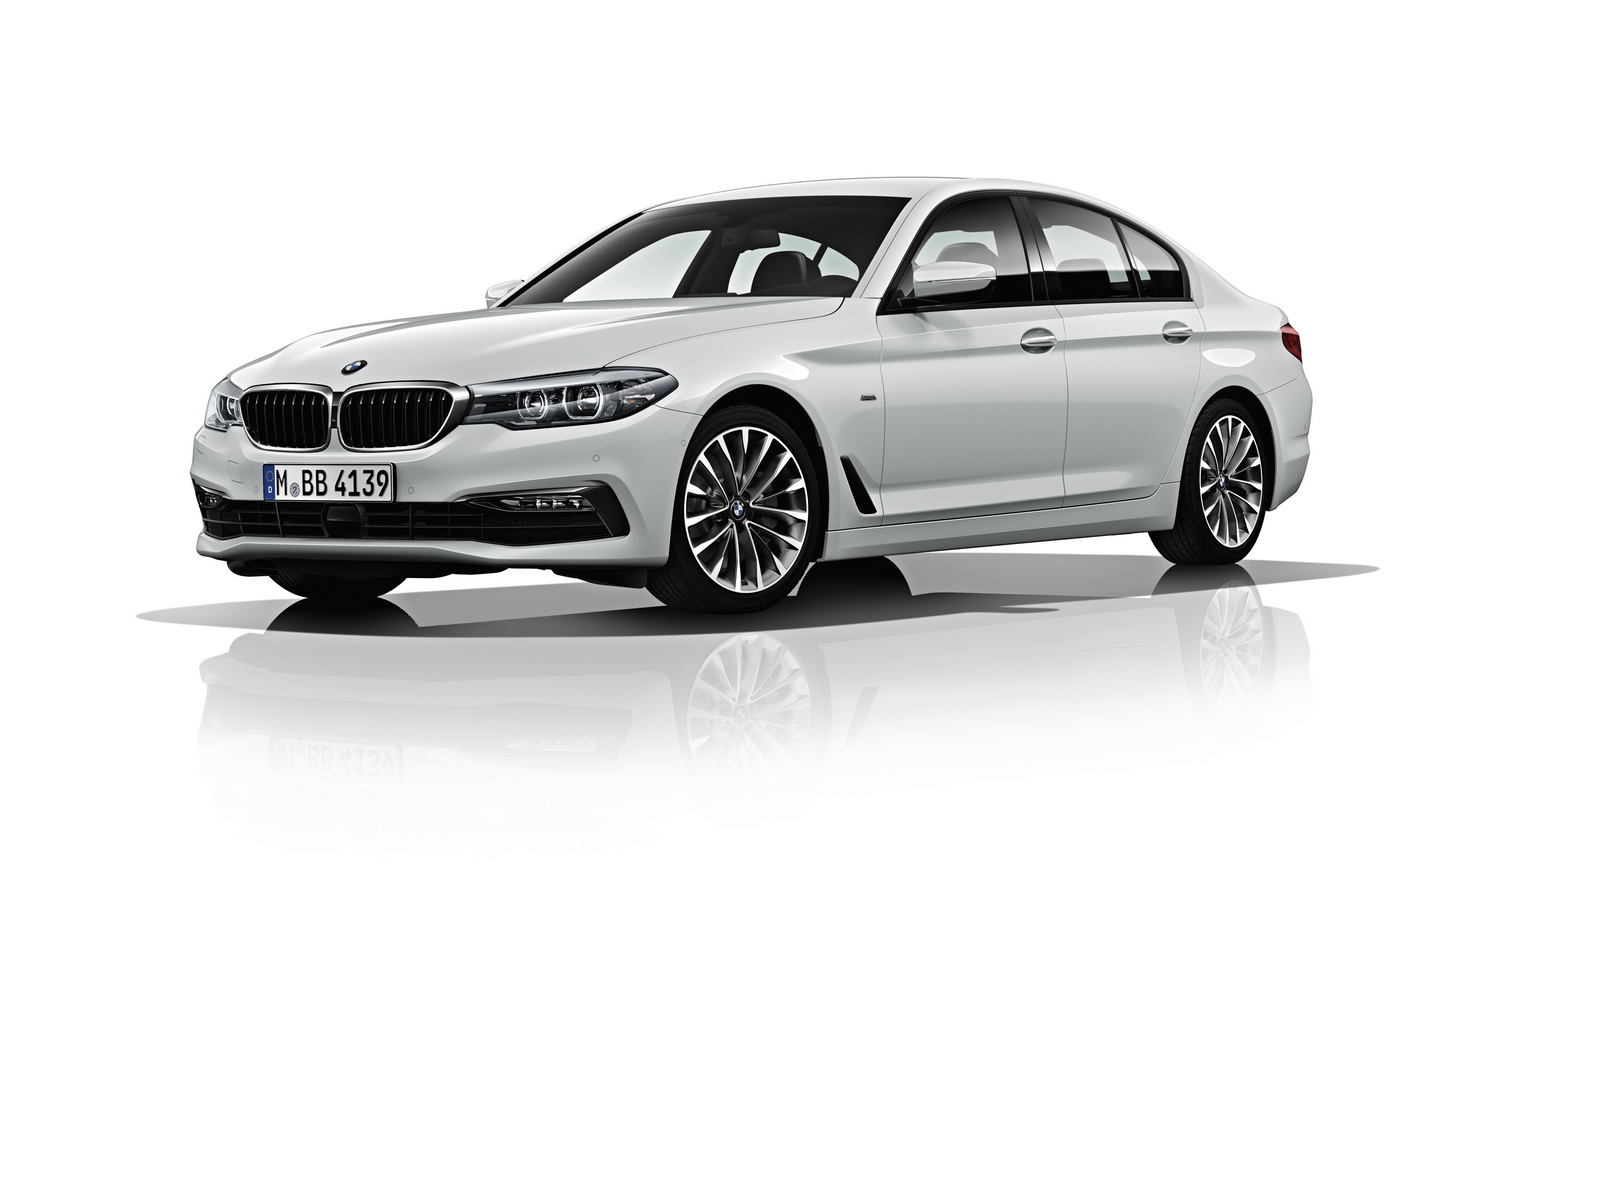 BMW 520d Efficient Dynamics Is Now Equipped with Plenty of Updates, 3- and 6-Series Are Next